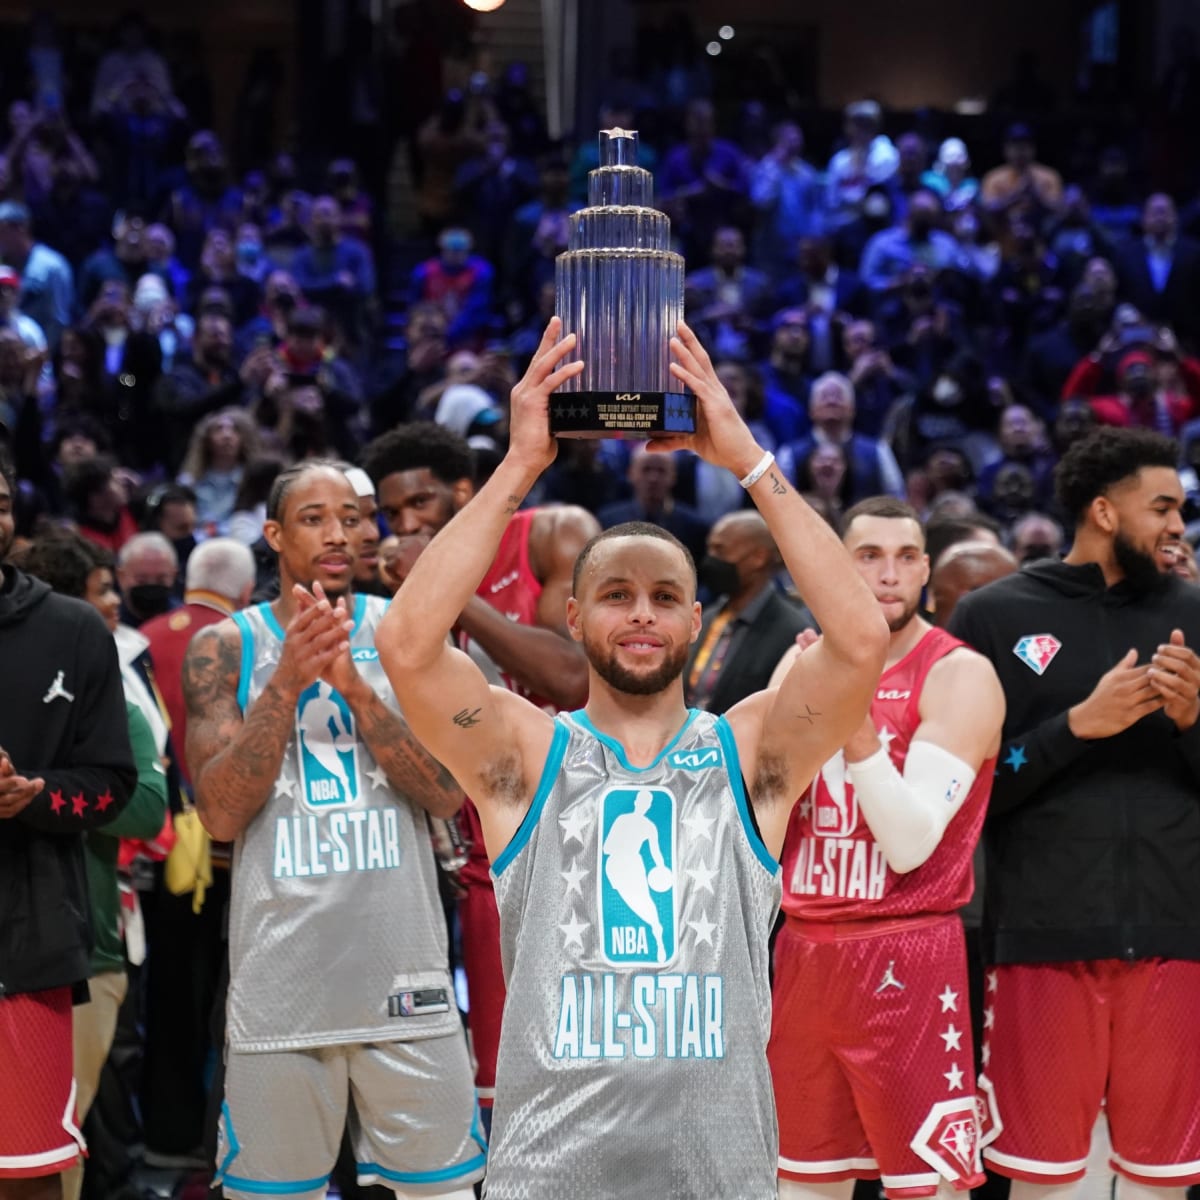 2022 NBA All-Star Game MVP winner: Stephen Curry drops 50 points